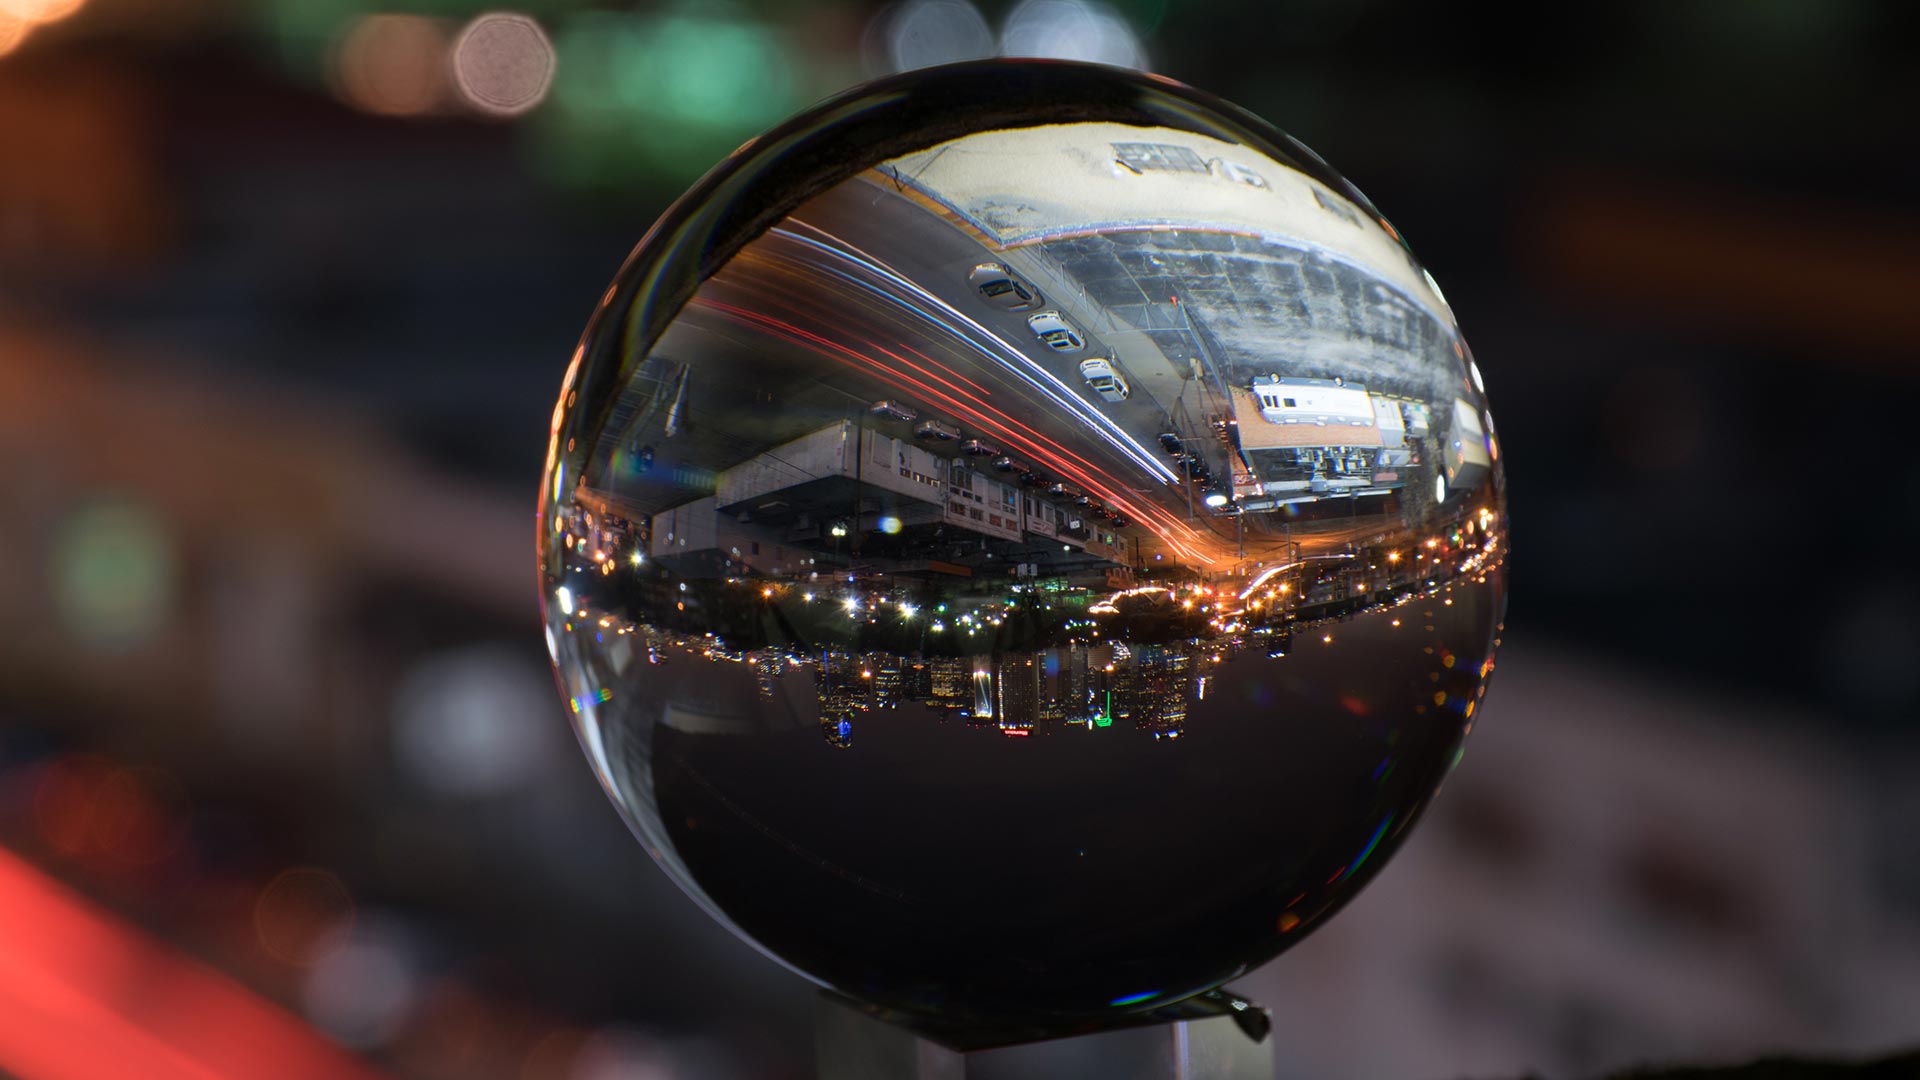 Crystal ball reflecting cityscape upside down at night